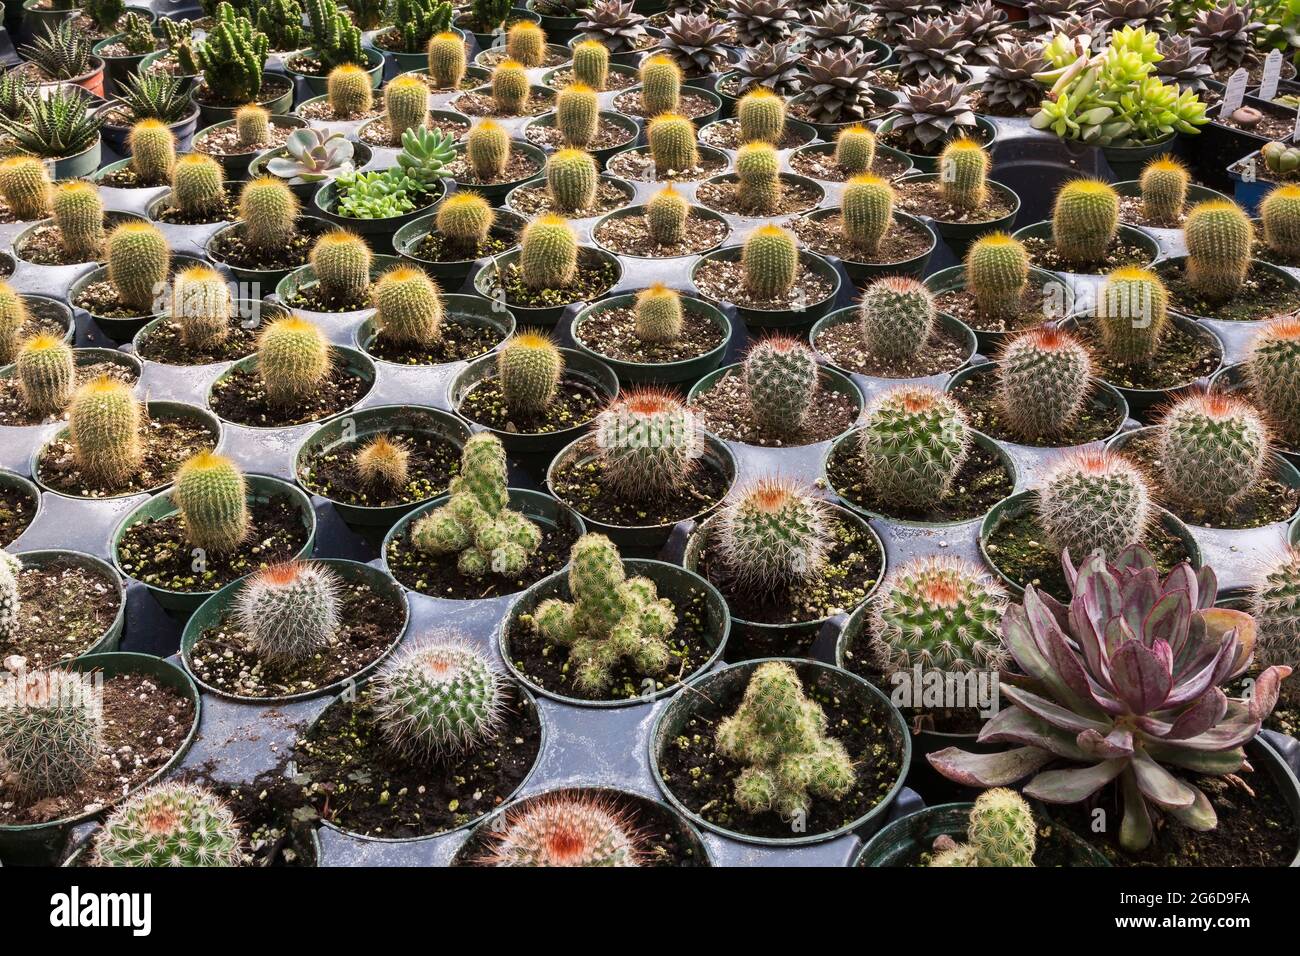 Mixed Cacti and Echeveria - Succulent plants growing in plastic containers inside greenhouse Stock Photo